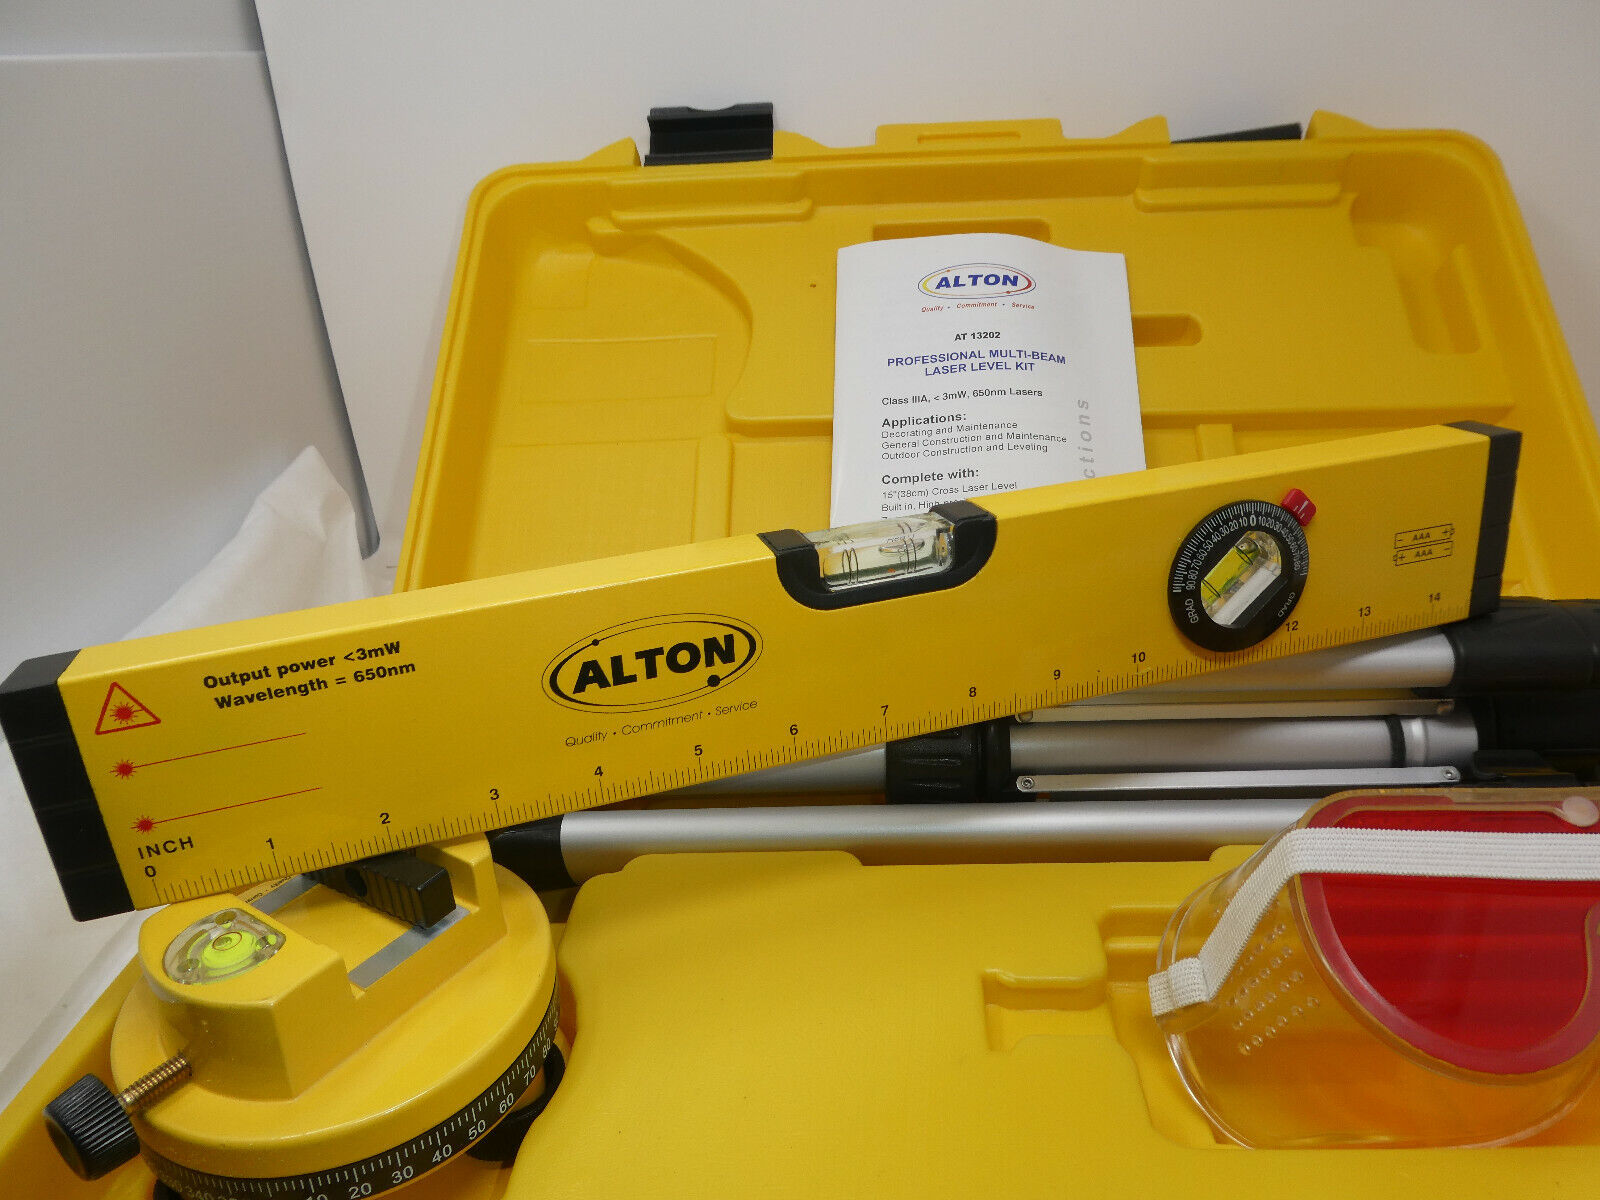 What Is An Alton Laser Level Worth To Used